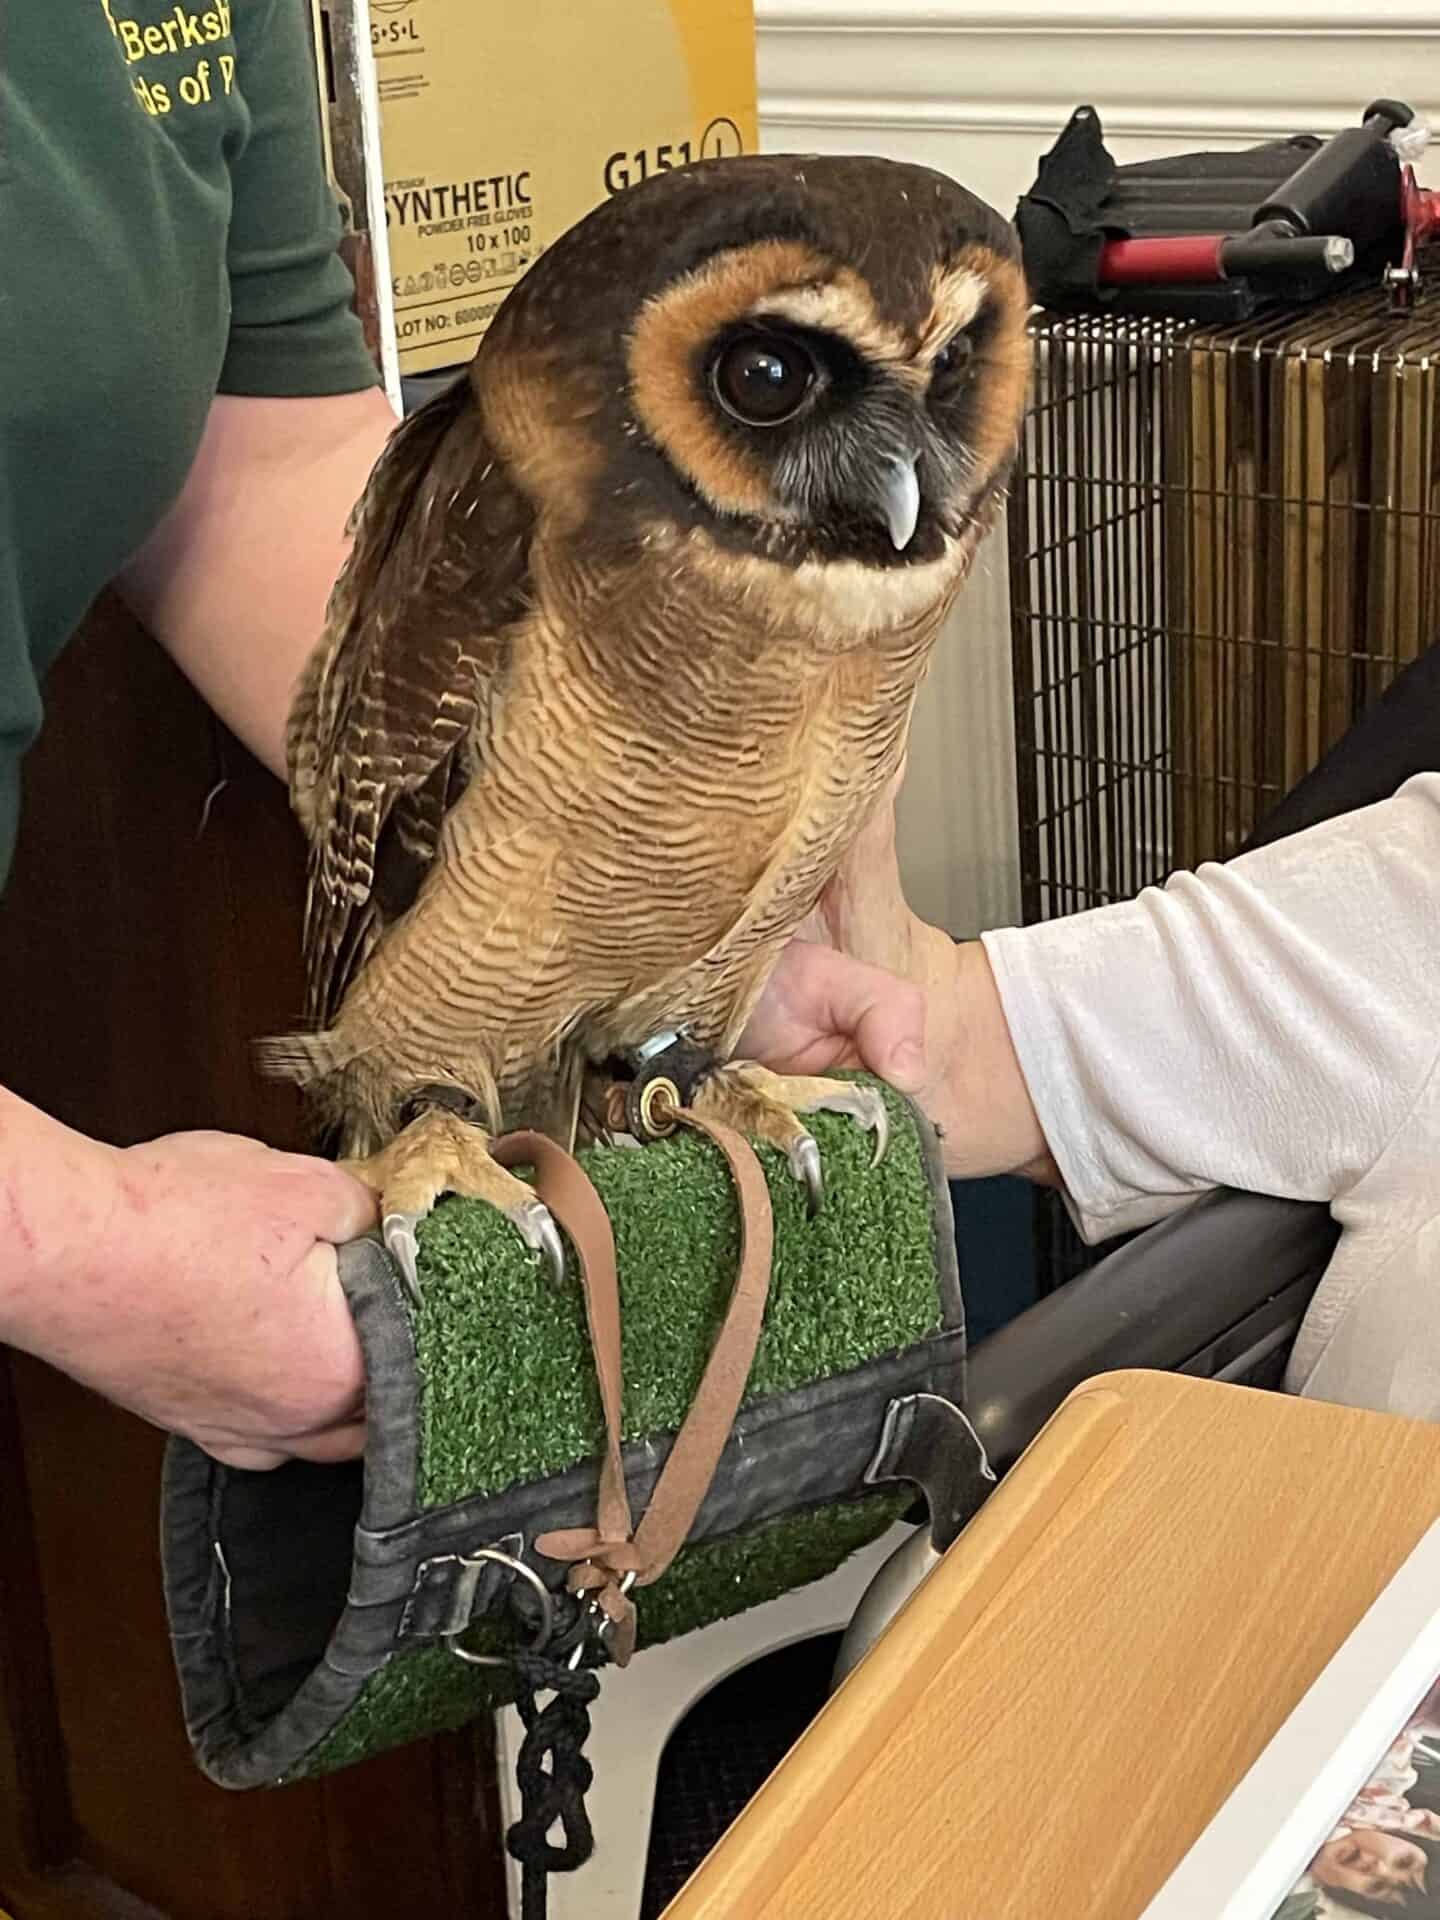 A majestic brown owl with piercing eyes perched on a gloved hand during a Wildlife Observation visit, showcasing its beautiful plumage and the careful handling it requires.